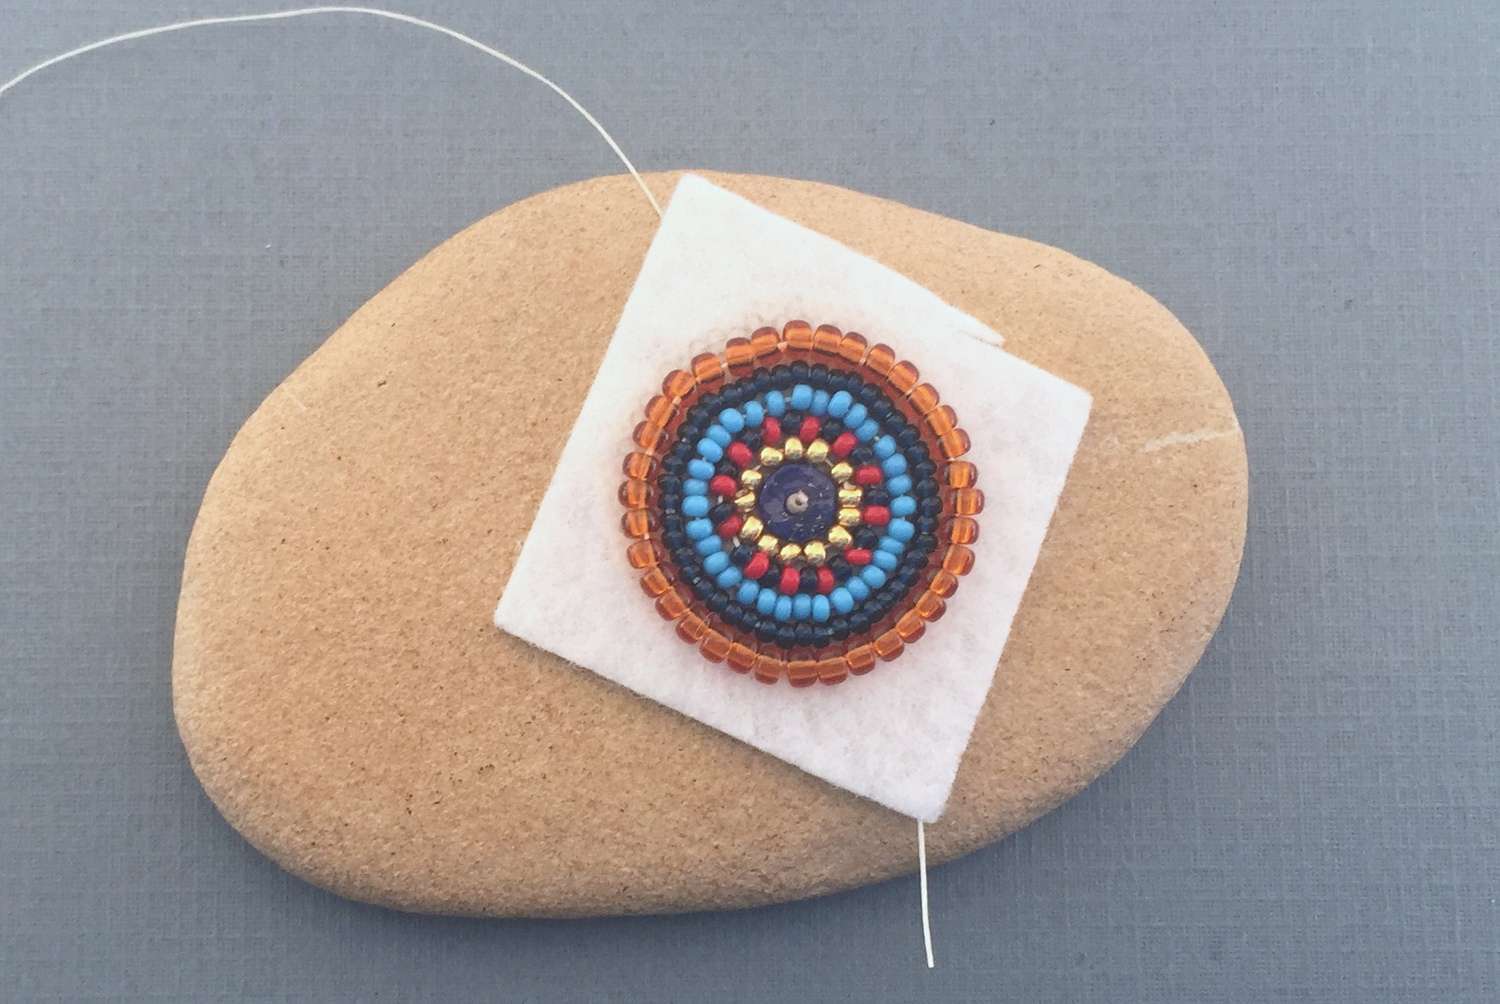 Backstitch bead embroidery tutorial